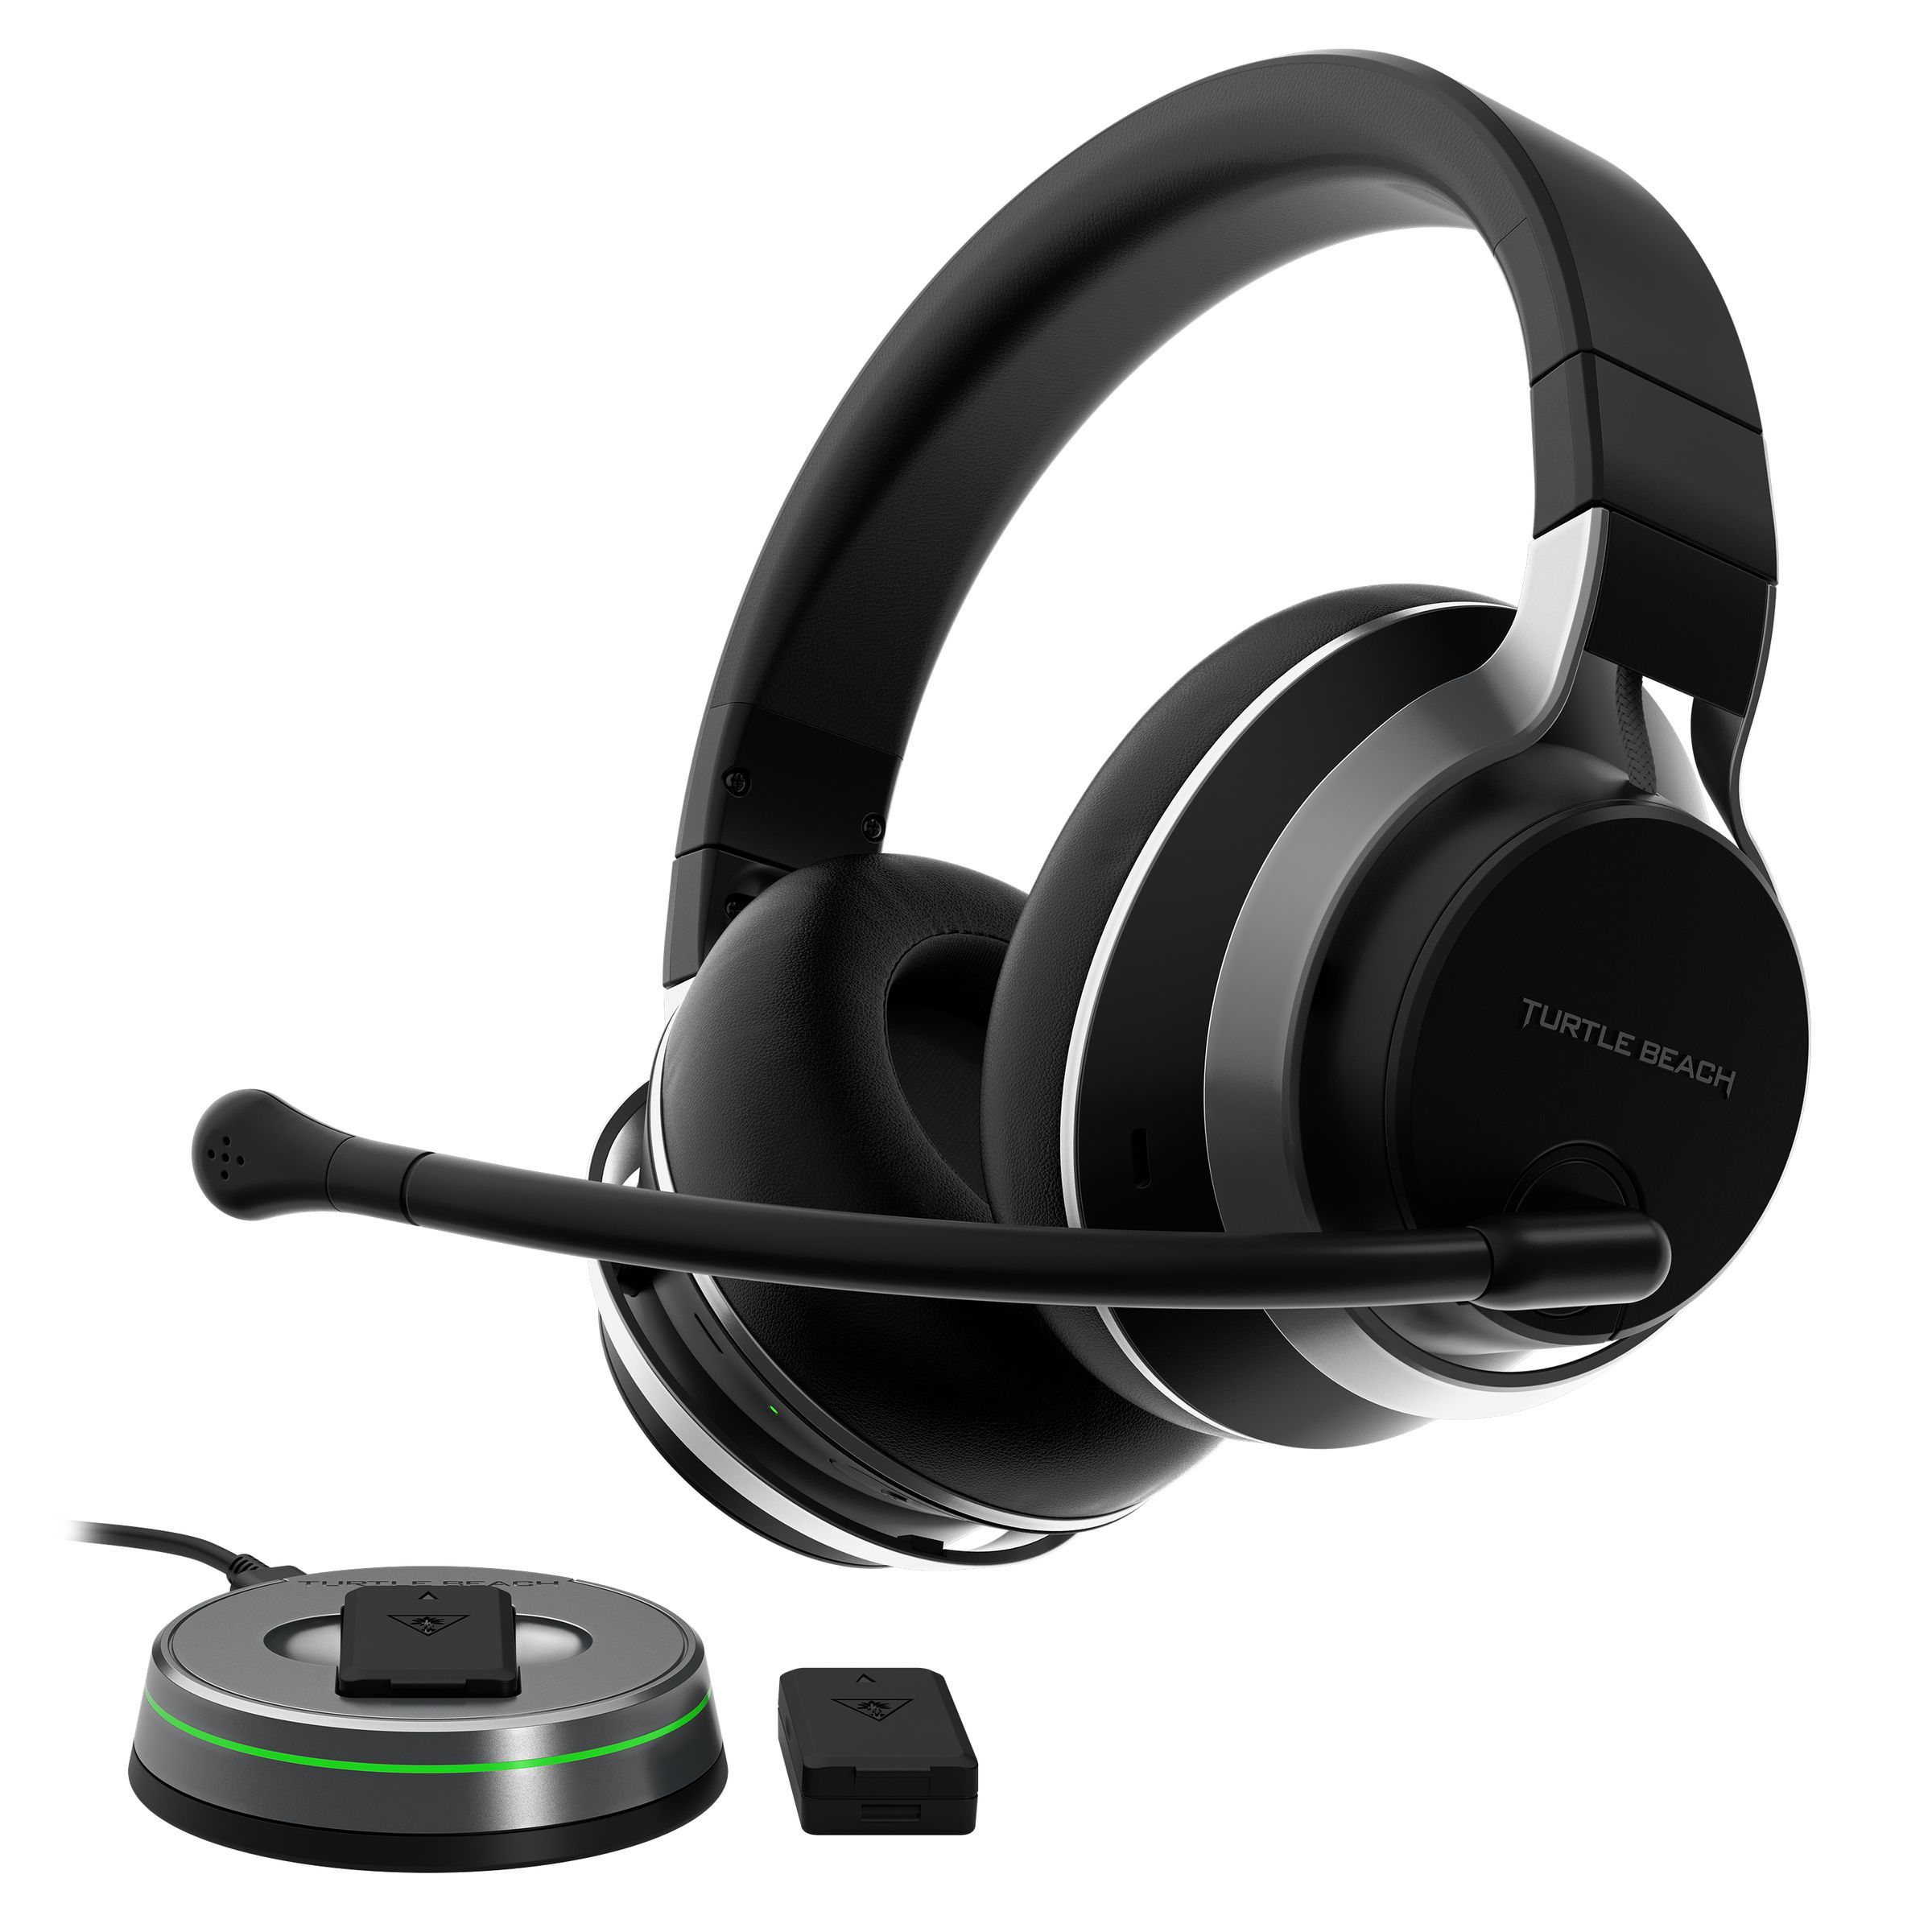 The Turtle Beach Stealth Pro gaming headset against a white backdrop. Its wireless transmission station and battery charger is pictured to the left.